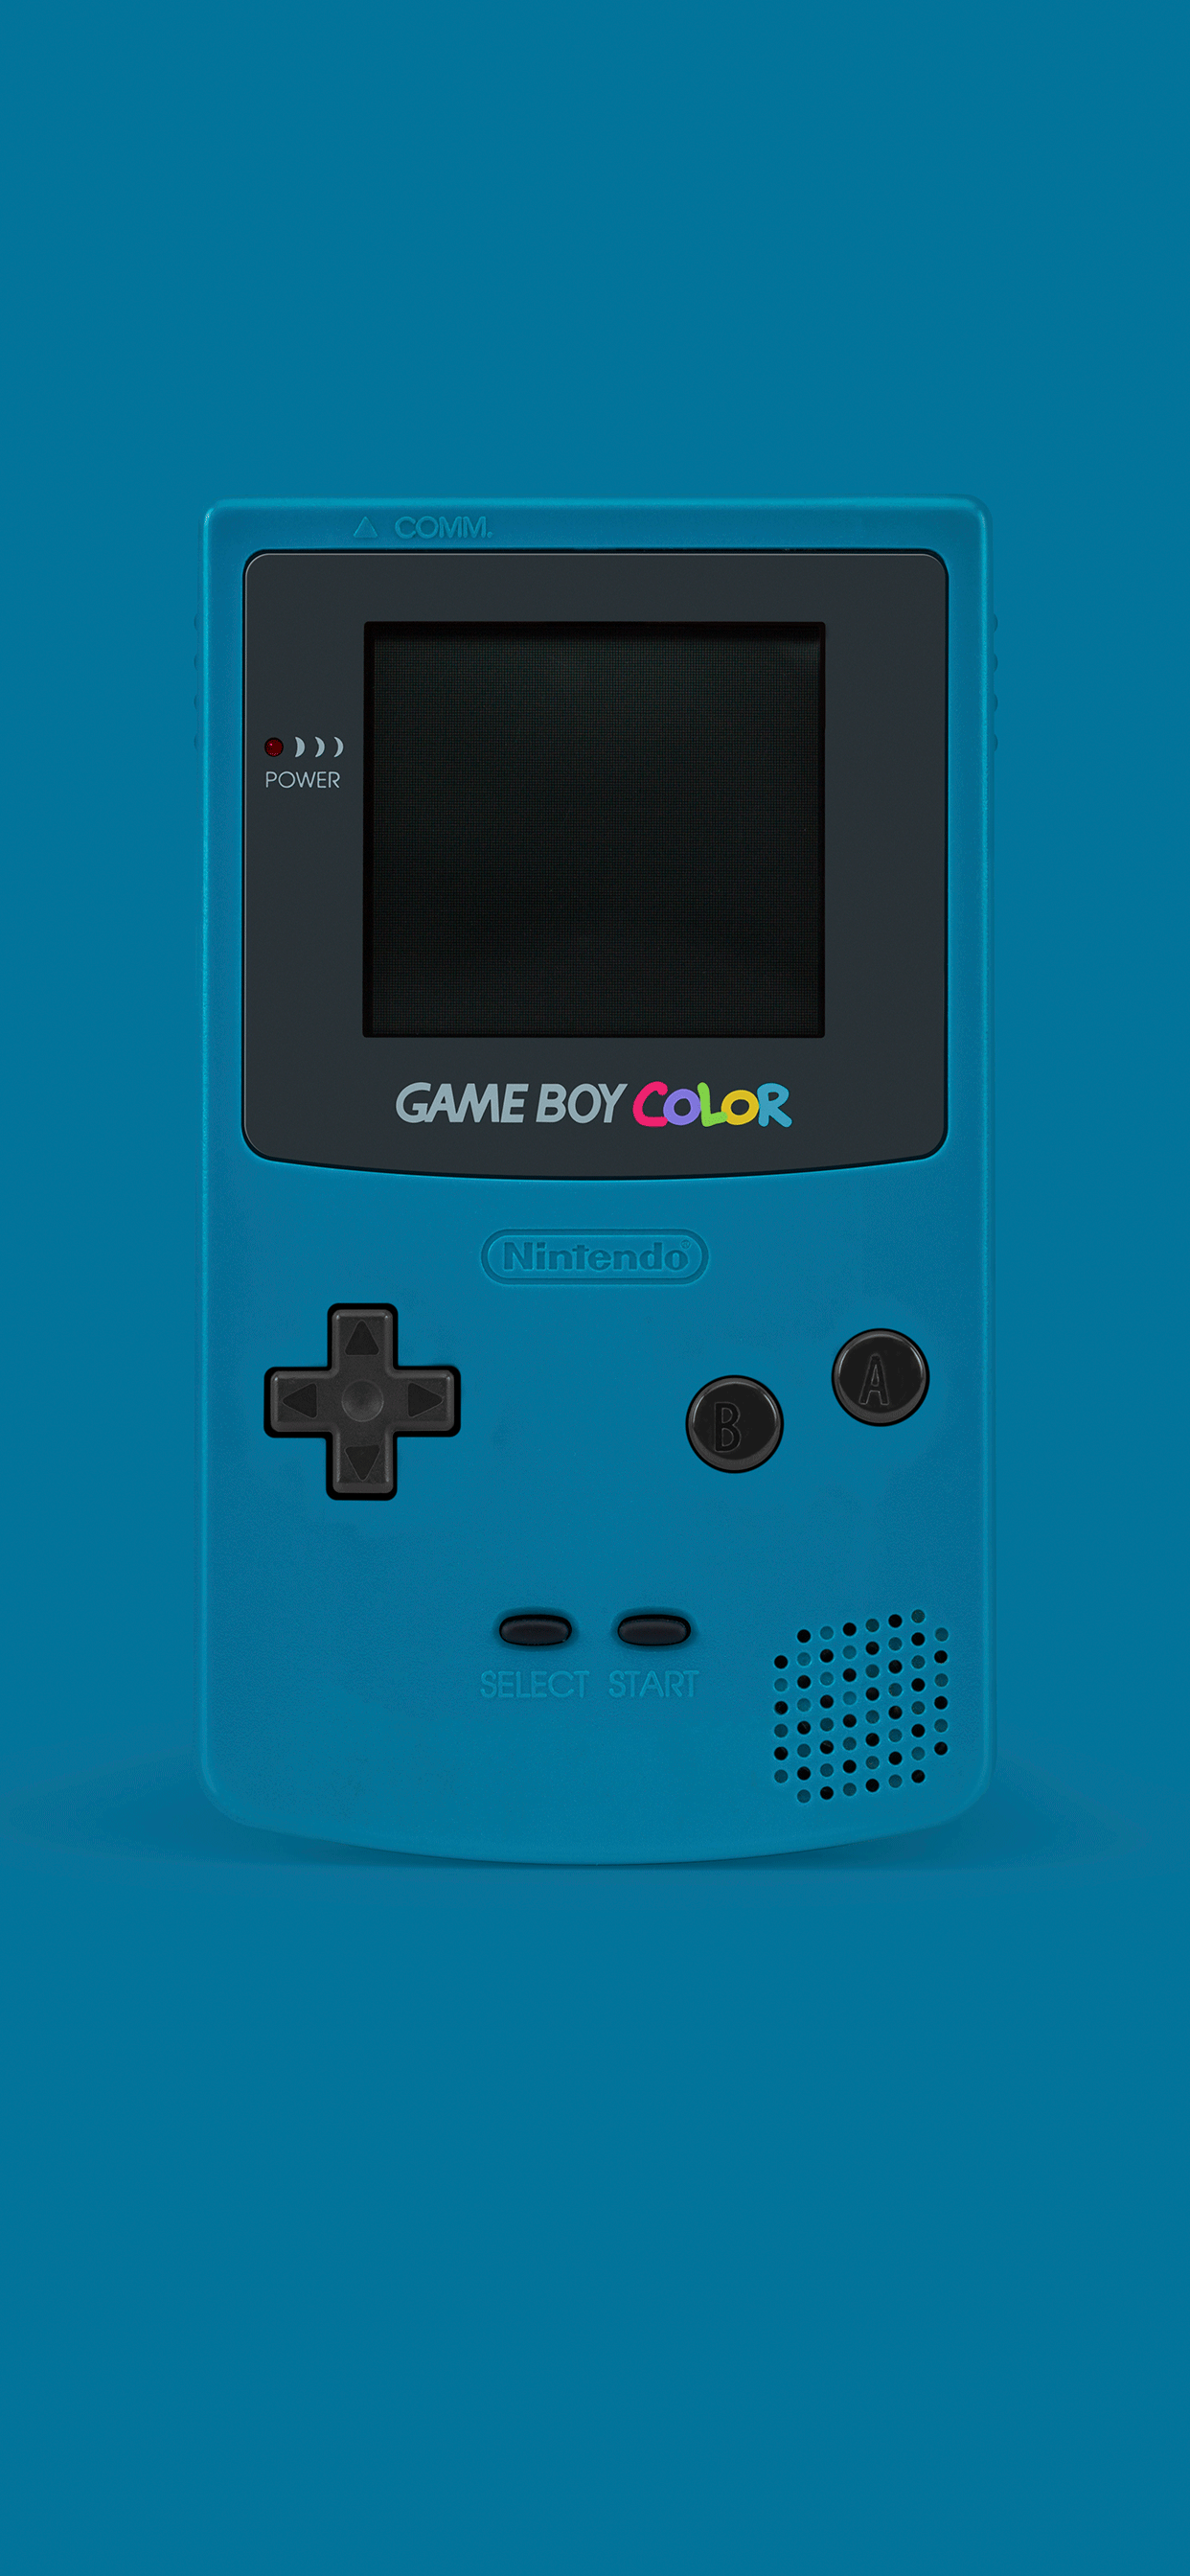 Game Boy Color Wallpaper for iPhone X, 6